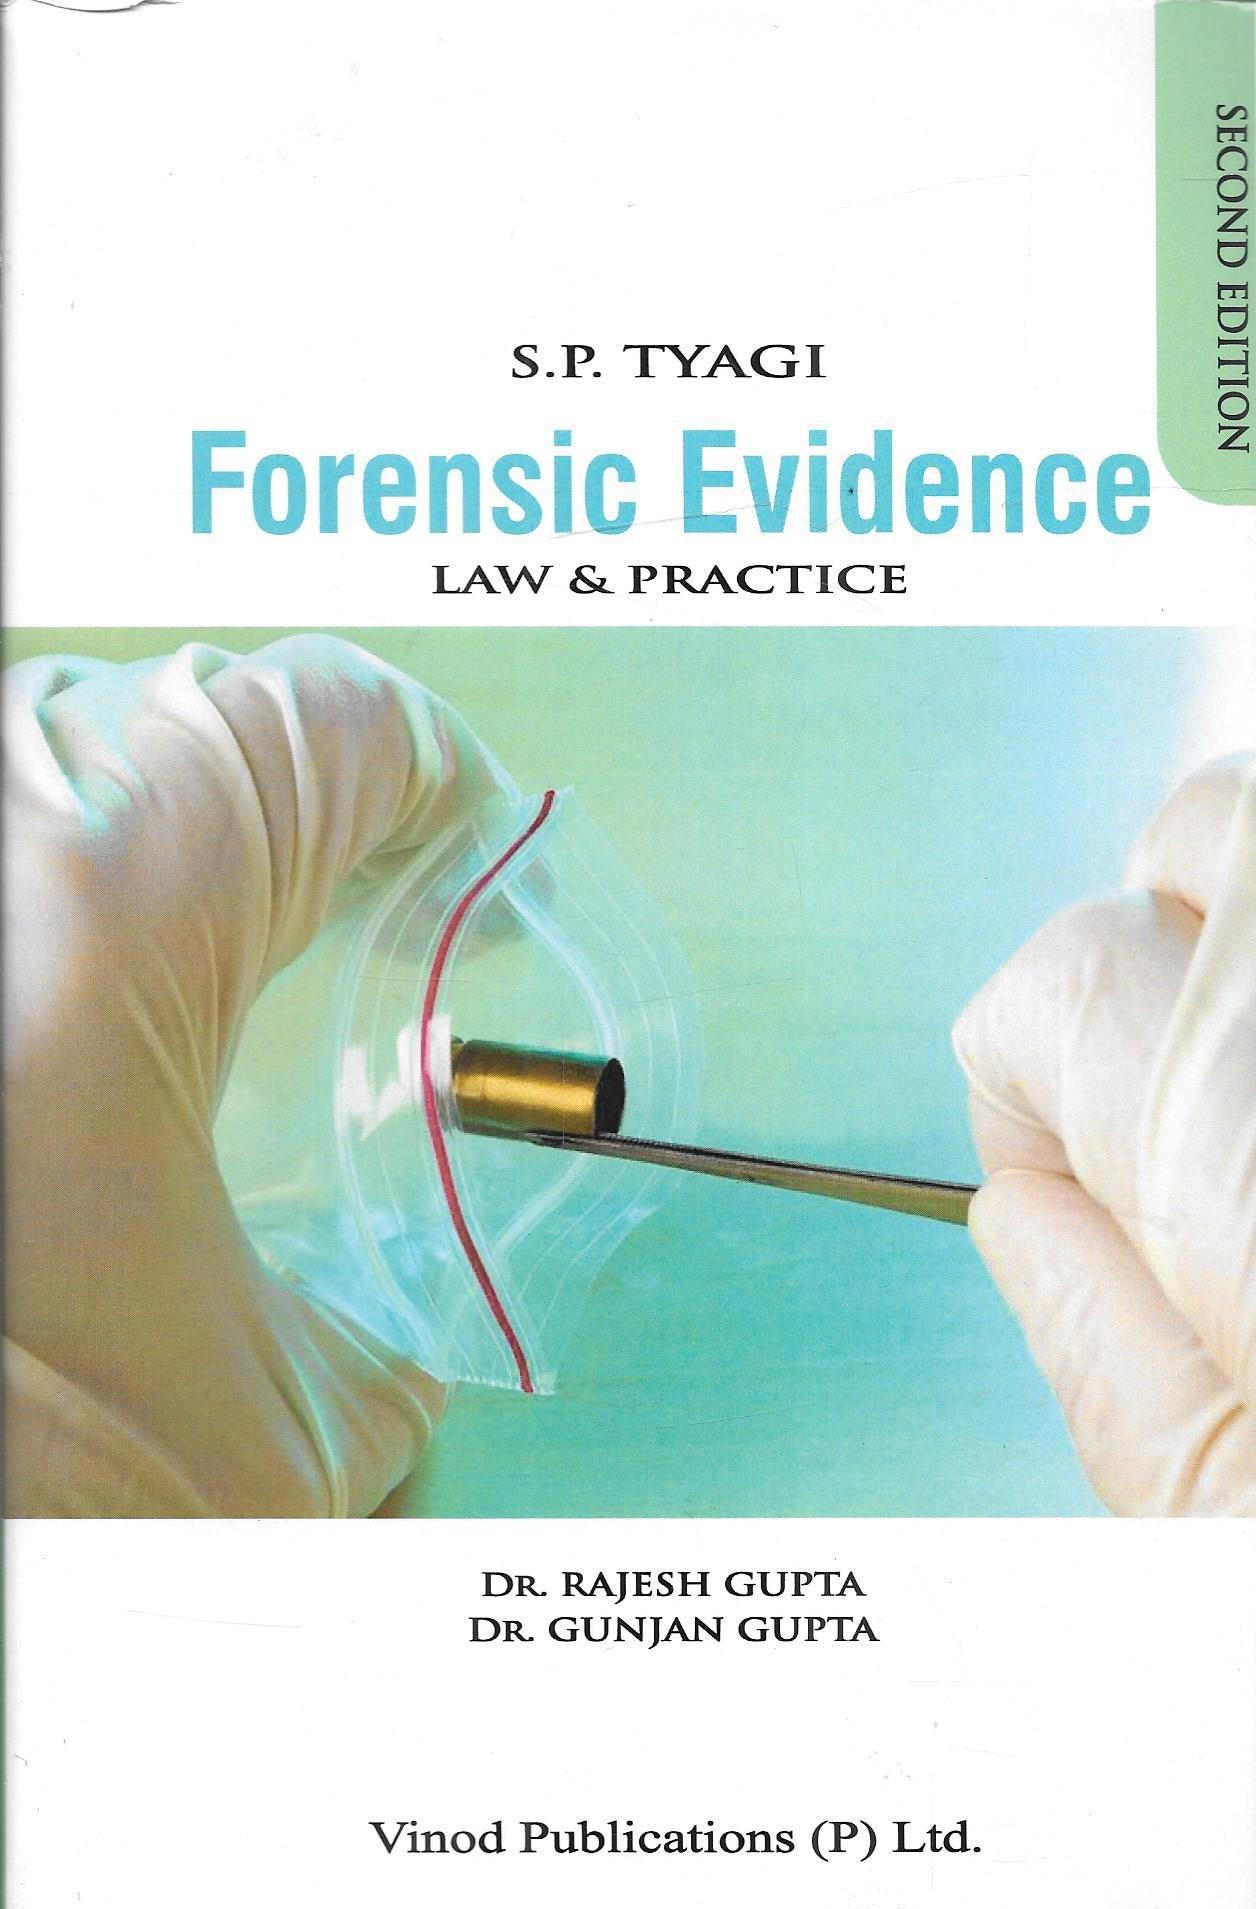 Forensic Evidence – Law & Practice